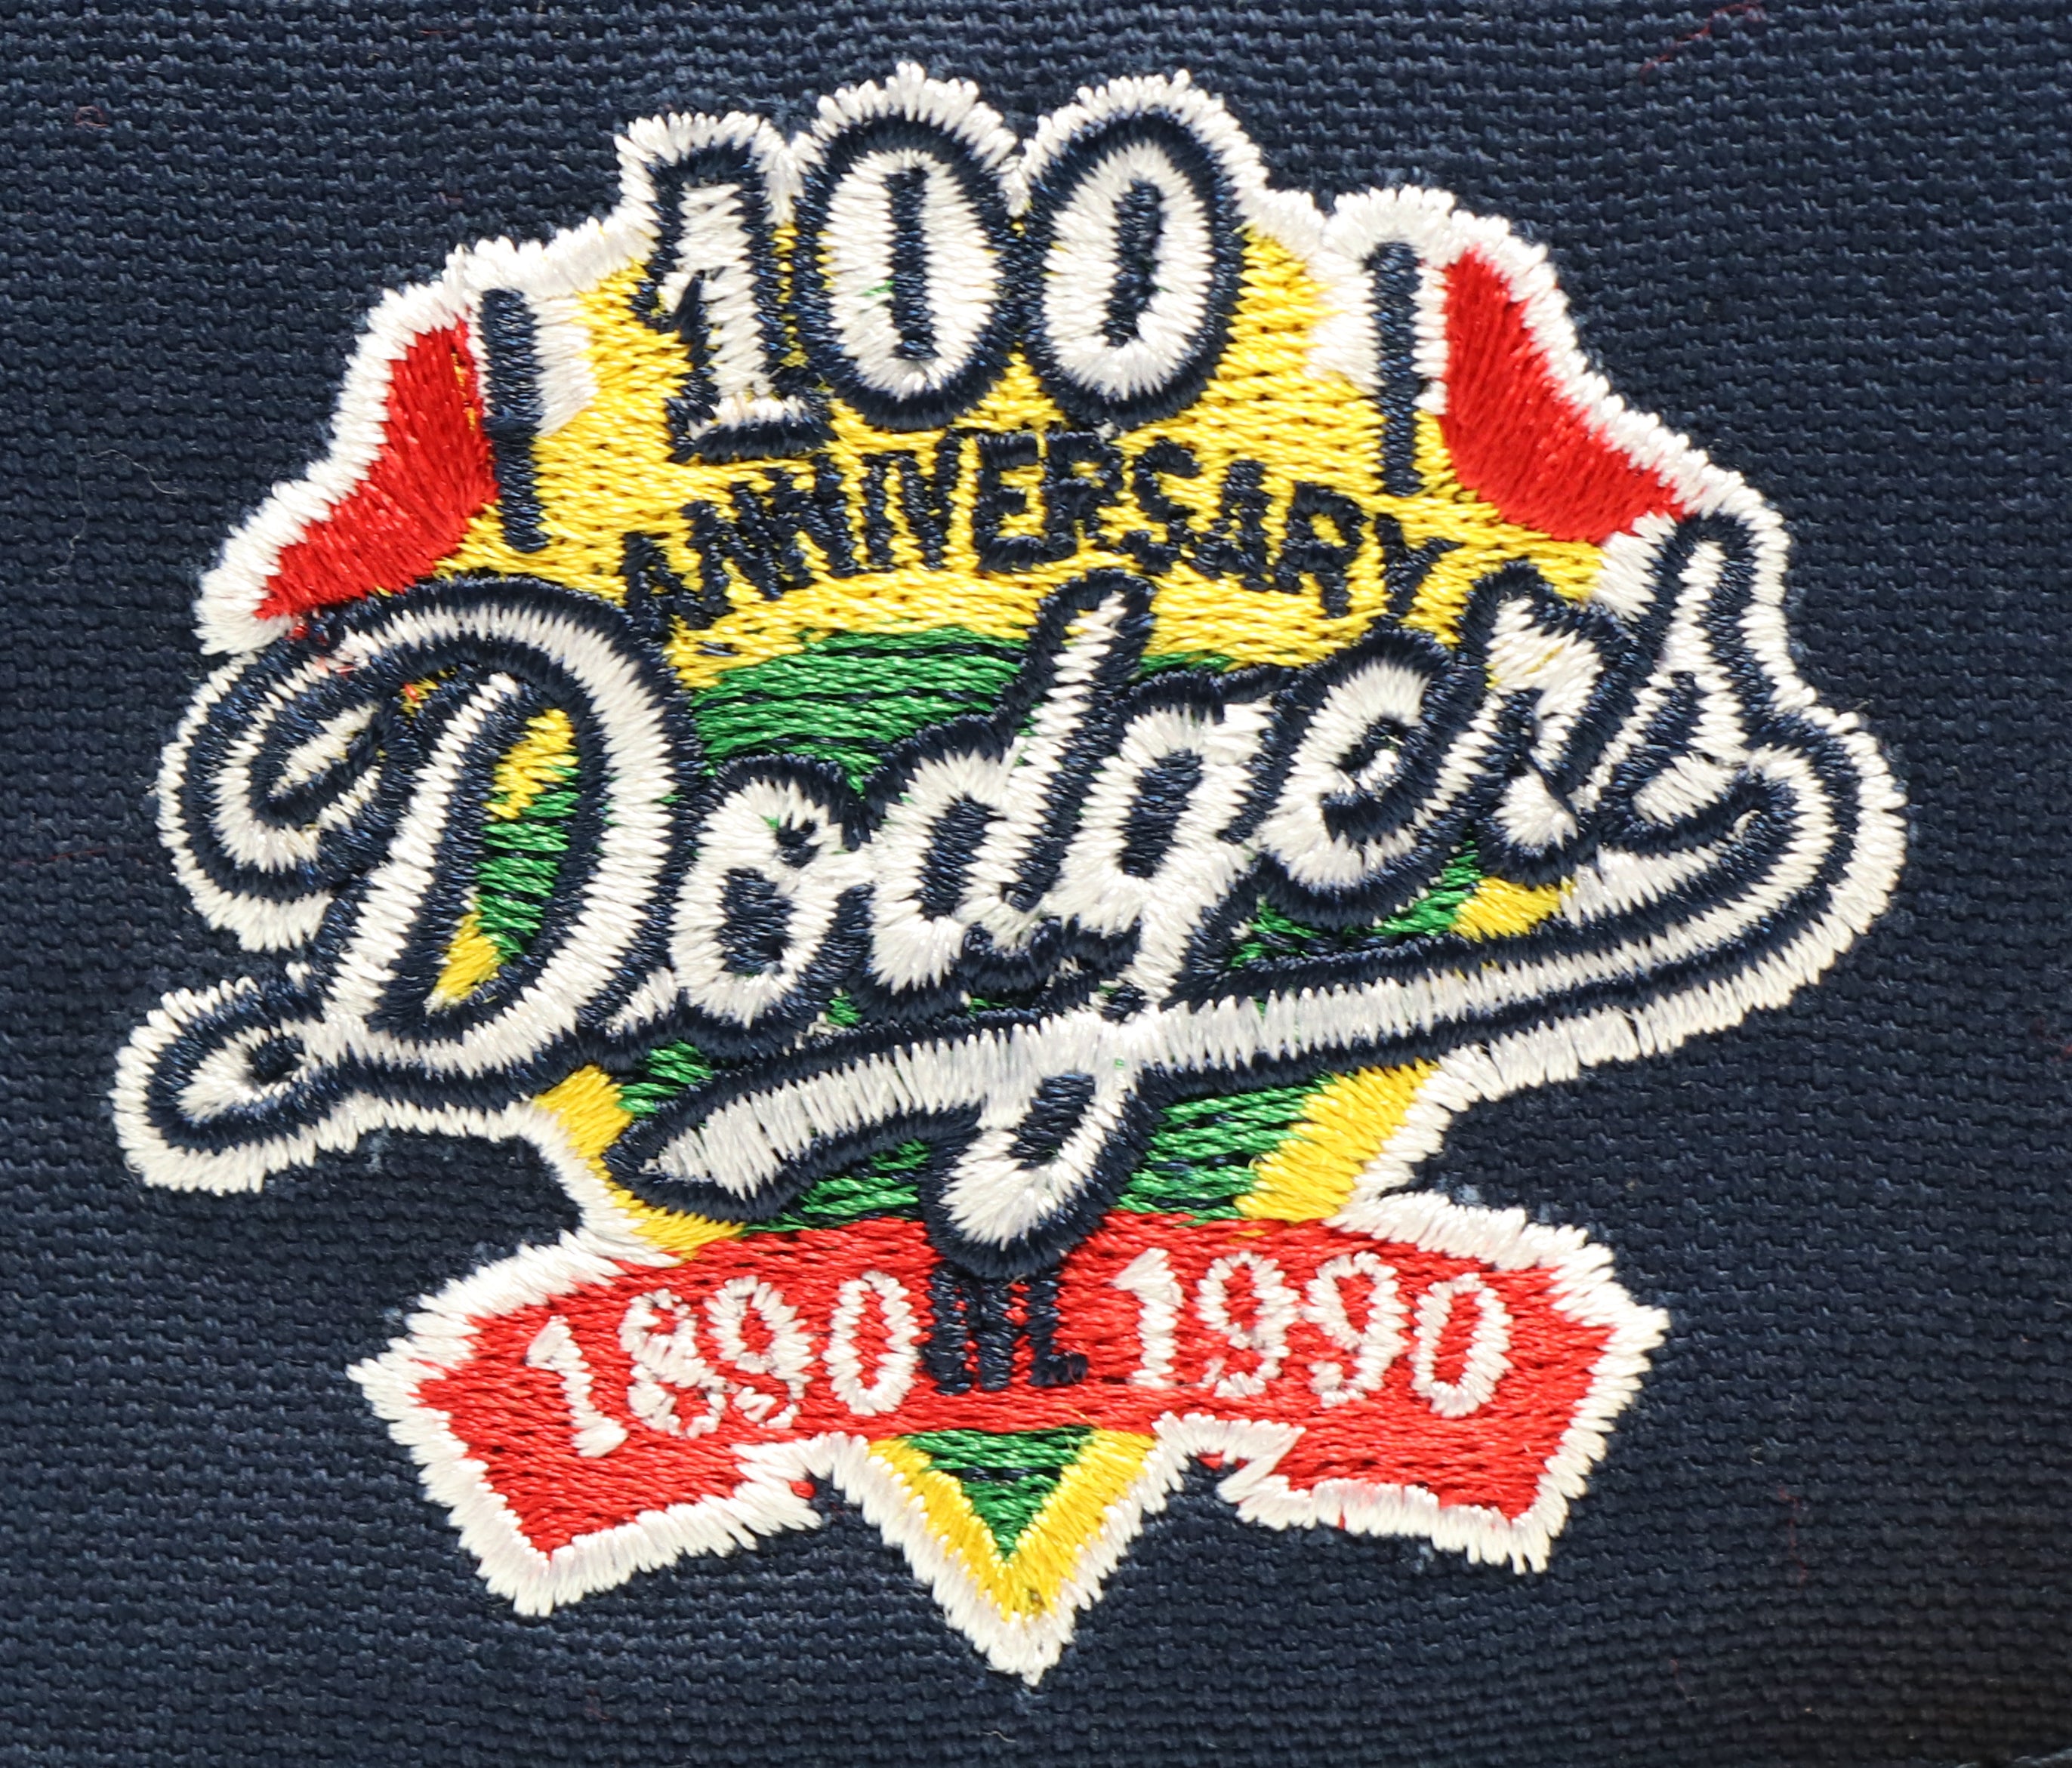 LOS ANGELES DODGERS "100TH ANNIVERSARY" NEW ERA 59FIFTY FITTED (RED UNDER VISOR) (S)